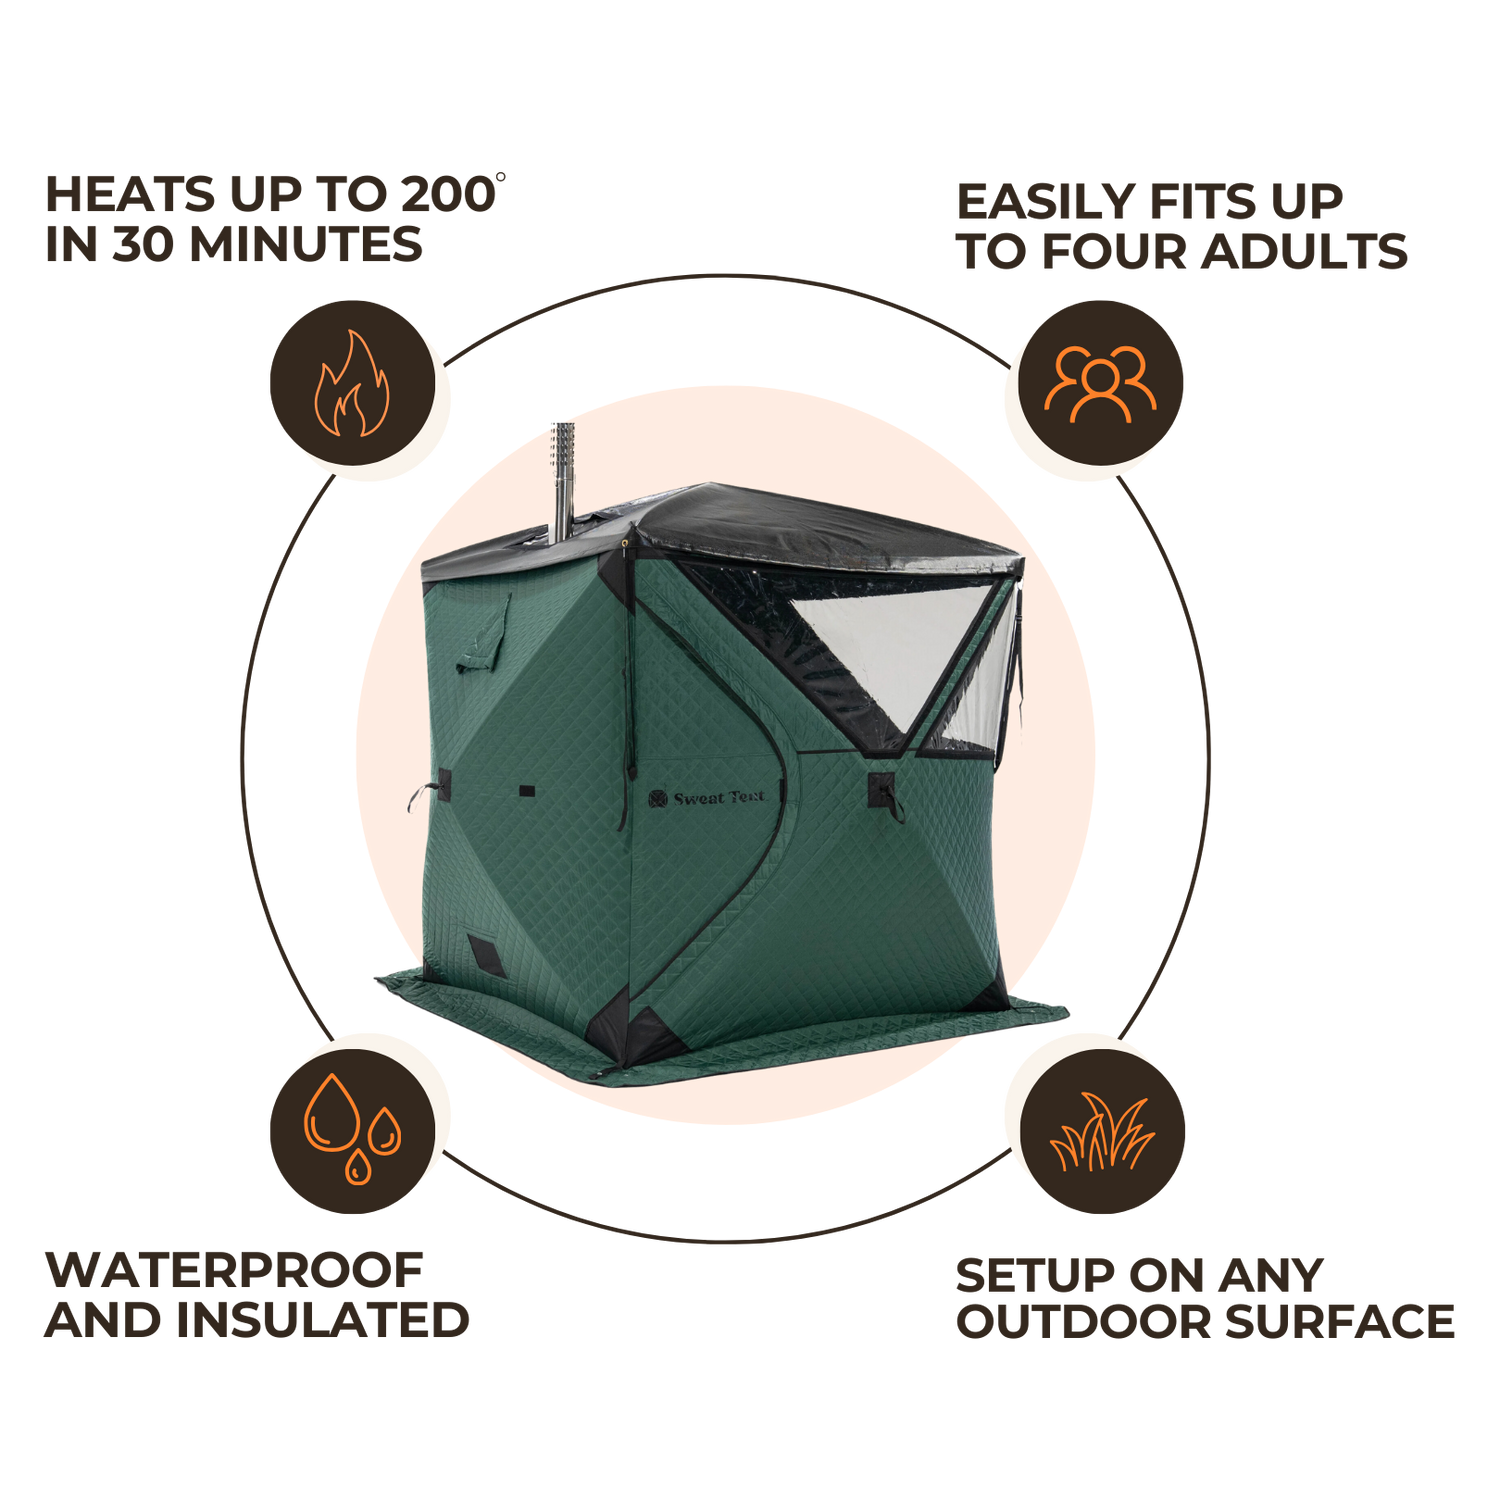 The Sweat Tent fits four adults, heats up to 200 degrees in thirty minutes, is waterproof, and can be setup on any outdoor surface. 